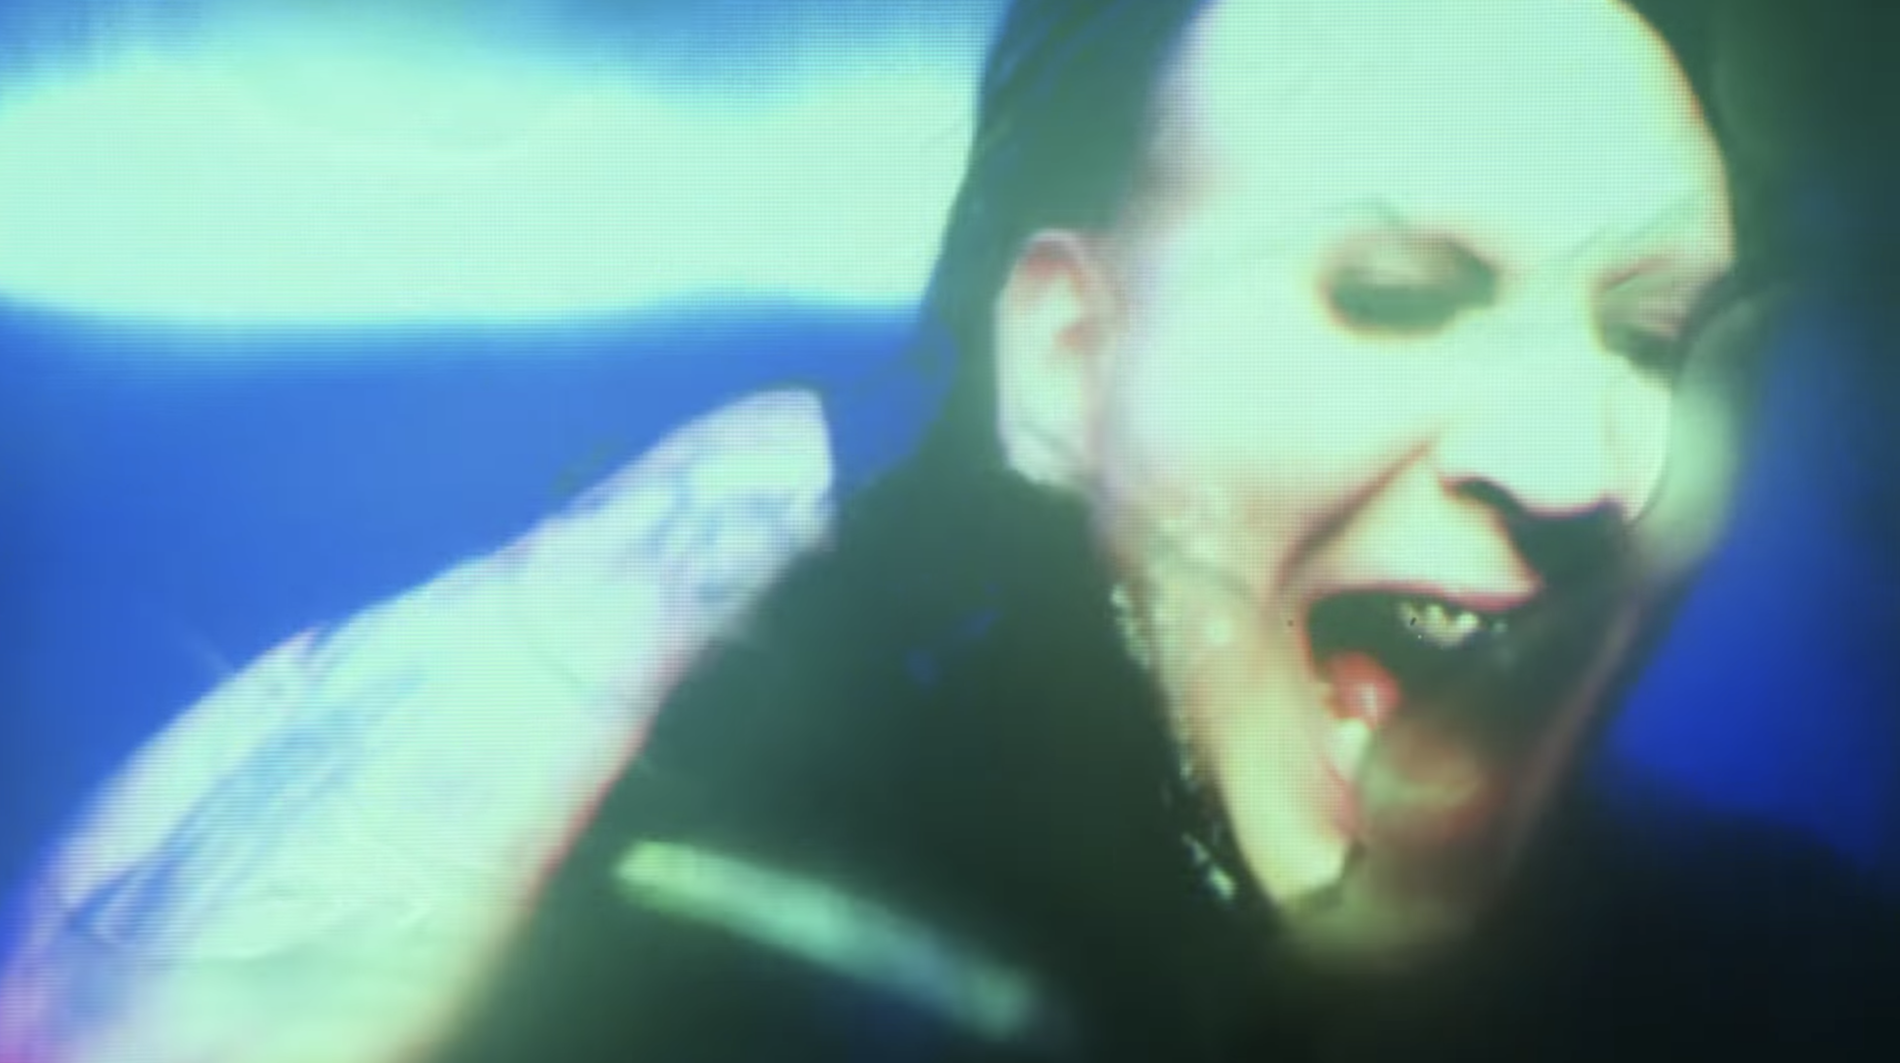 Marilyn Manson covers The Lost Boys' 'Cry Little Sister' for X-Men spinoff The  New Mutants